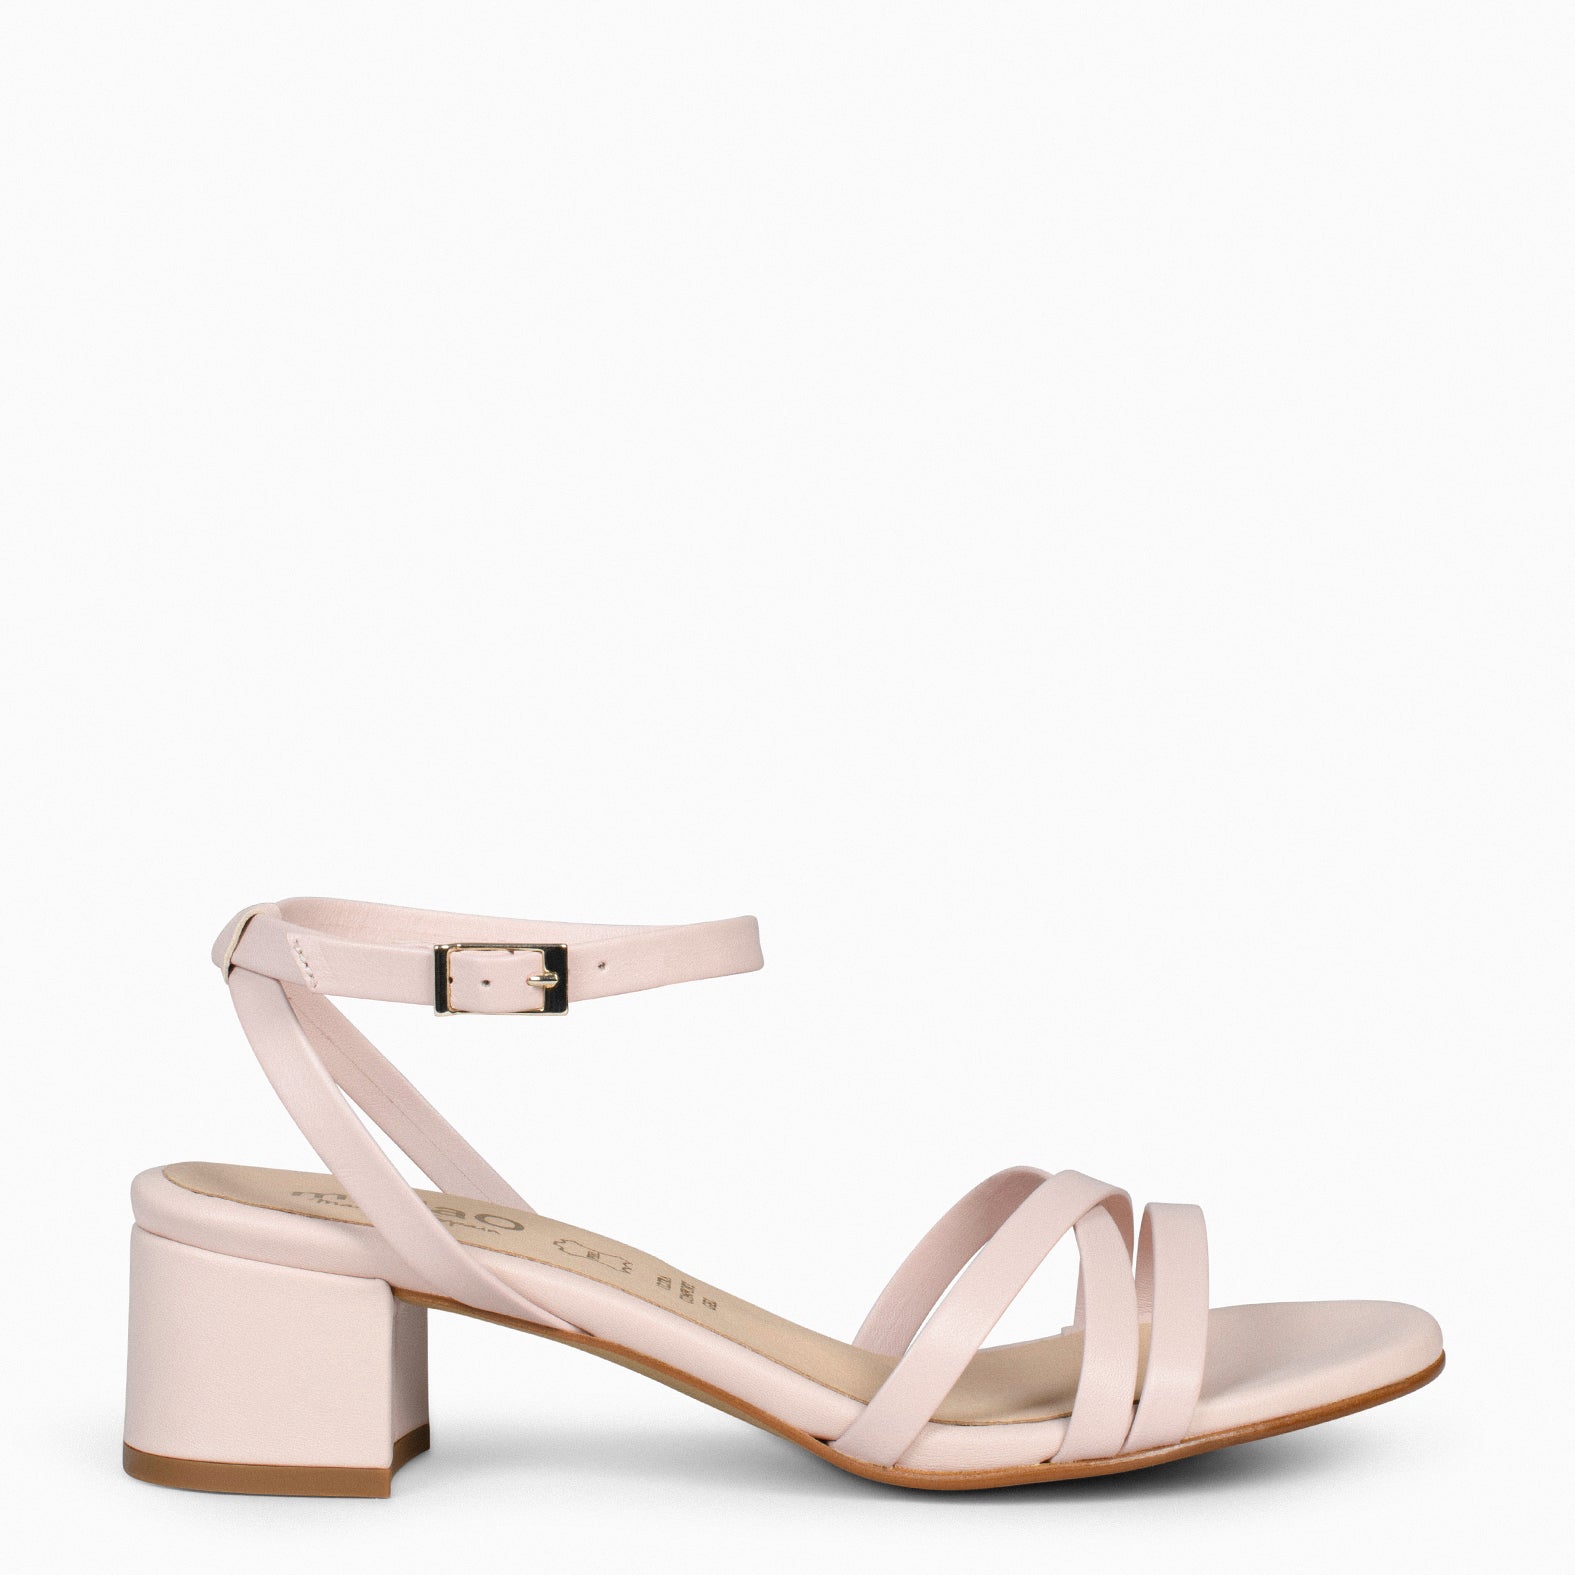 VIENA – NUDE SANDAL WITH THIN STRAPS AND LOW HEEL